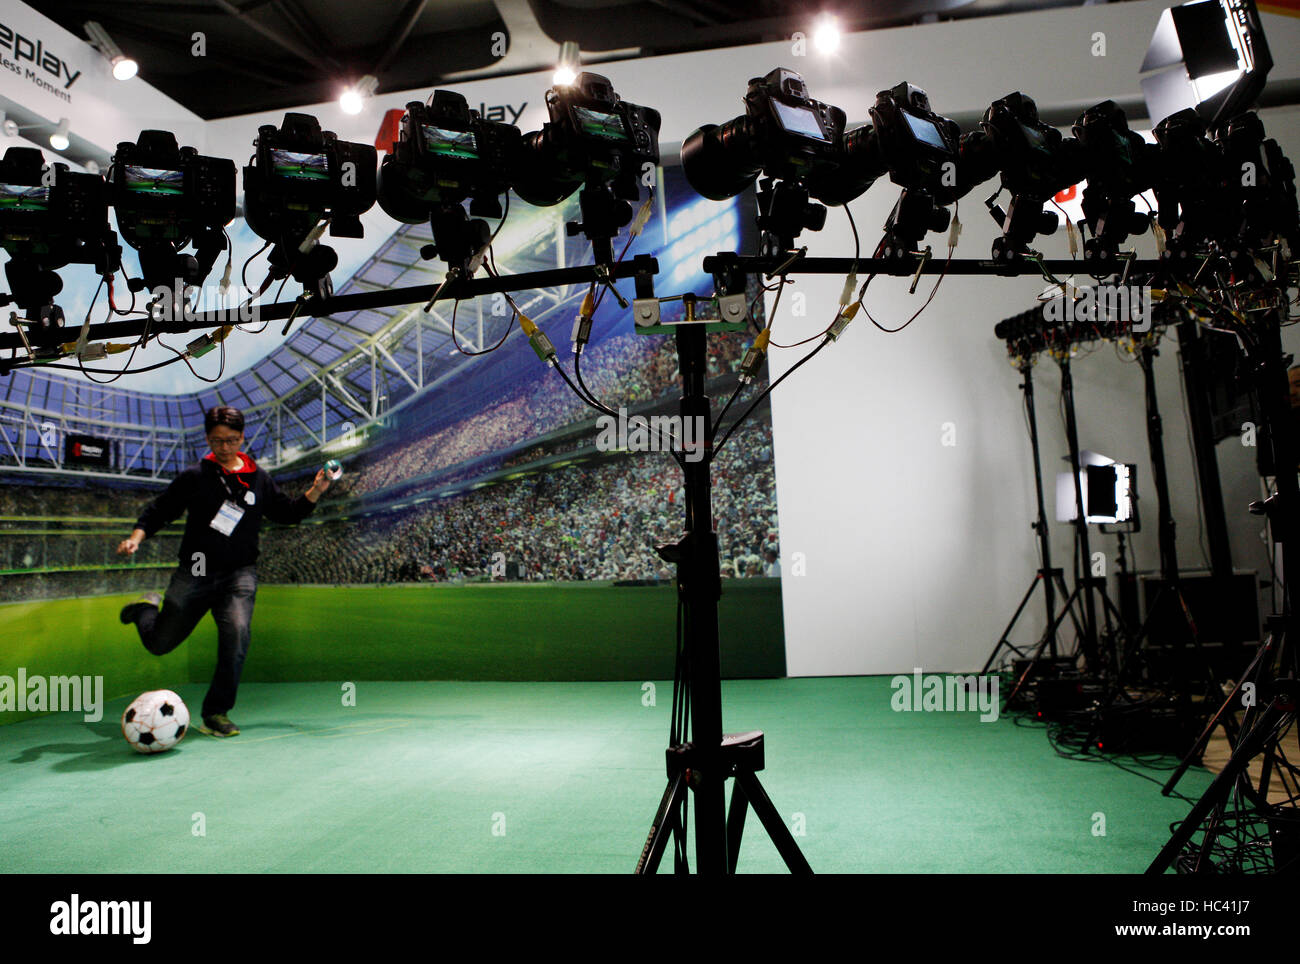 Shanghai. 7th Dec, 2016. An exhibitor shows a 4D video shooting system at the National Association of Broadcasters (NAB) Show Shanghai held in east China's Shanghai, Dec. 7, 2016. Building on the strength and success of the NAB Show brand and its global influence, Shanghai's show is the premier event for the broadcast and transmedia industry in the Asia and Pacific region. Credit:  Fang Zhe/Xinhua/Alamy Live News Stock Photo